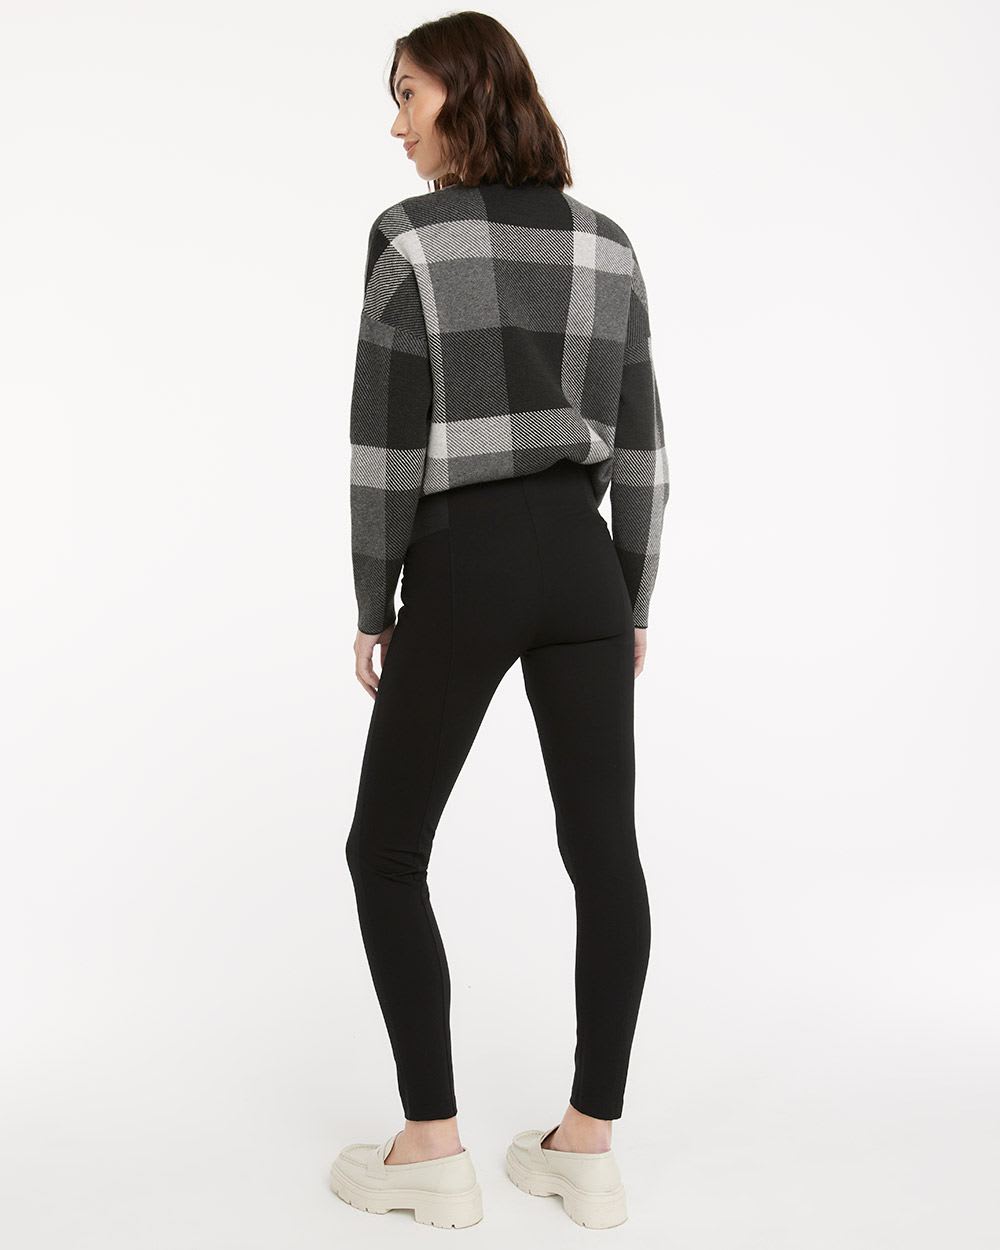 Solid Sculpting Leggings, The 365 Edition - Tall